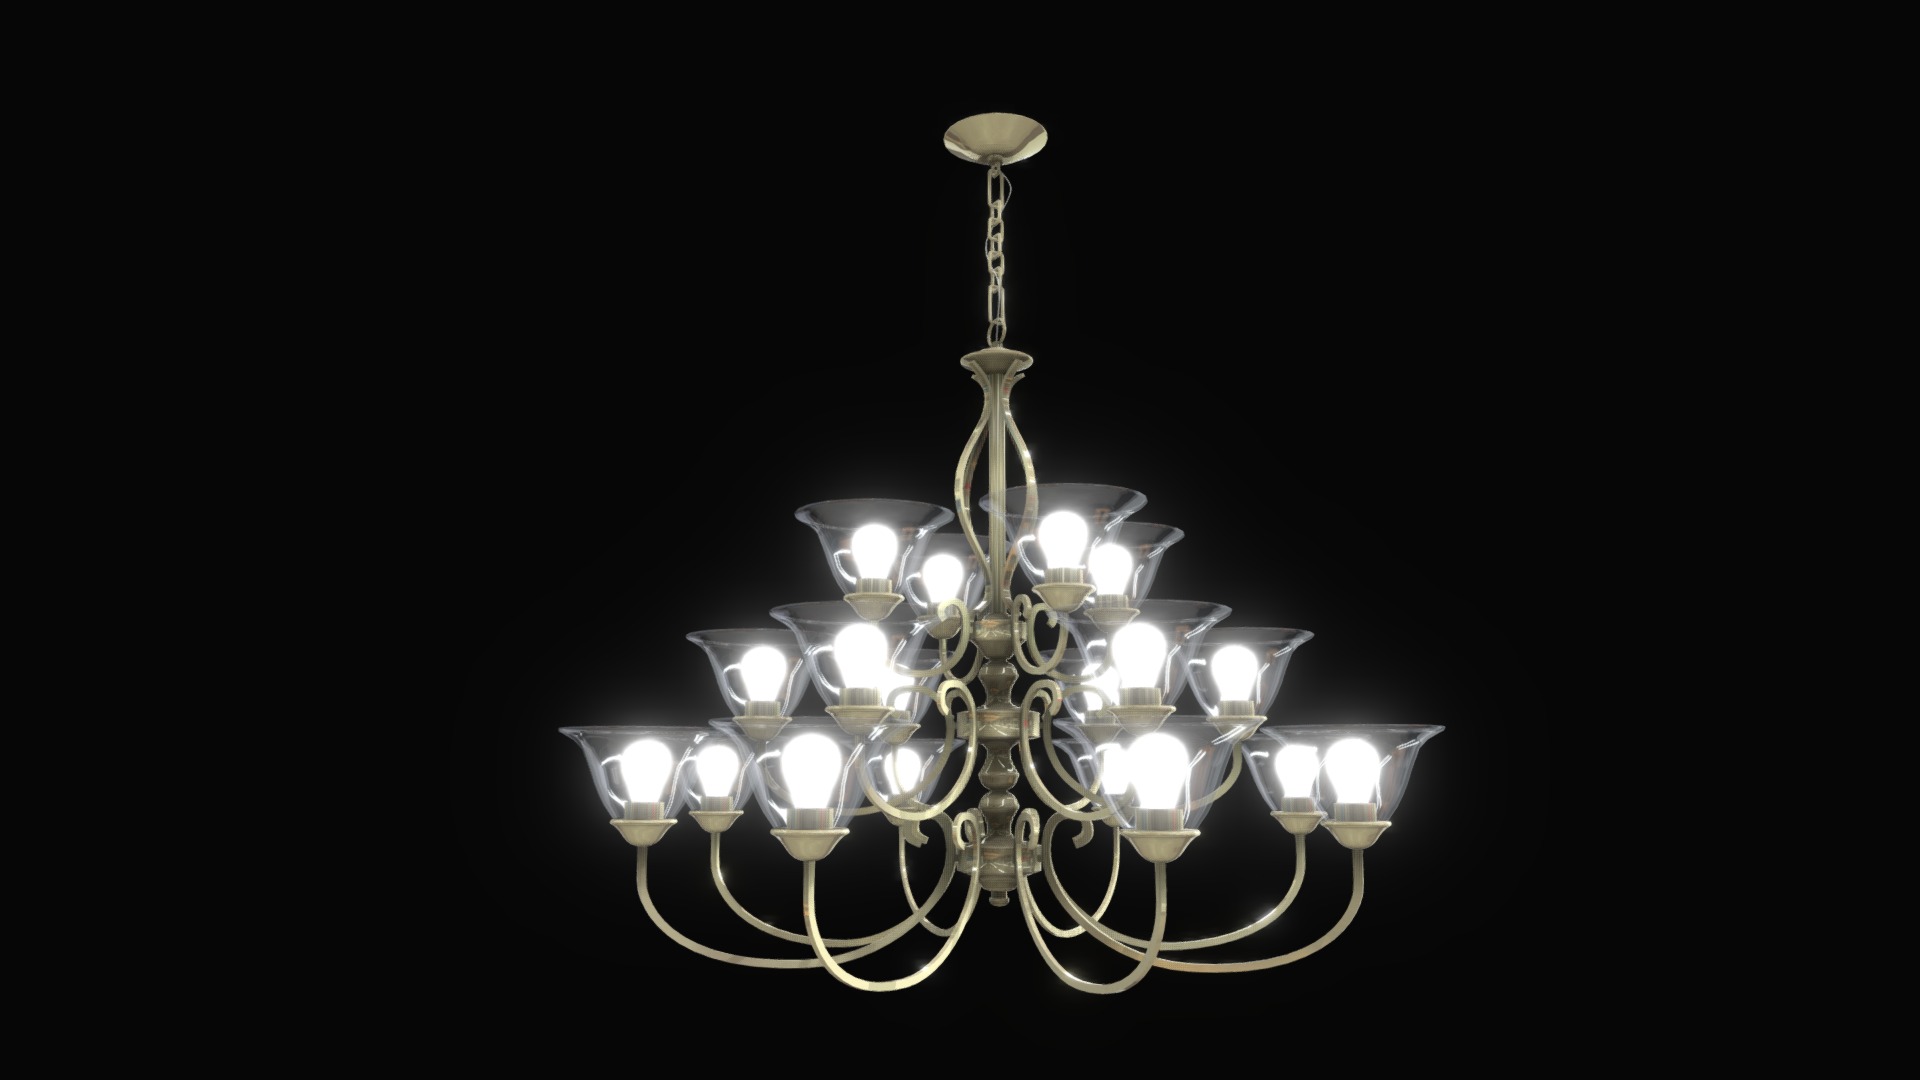 3D model HGP-2018CL-107 - This is a 3D model of the HGP-2018CL-107. The 3D model is about a chandelier with lights.